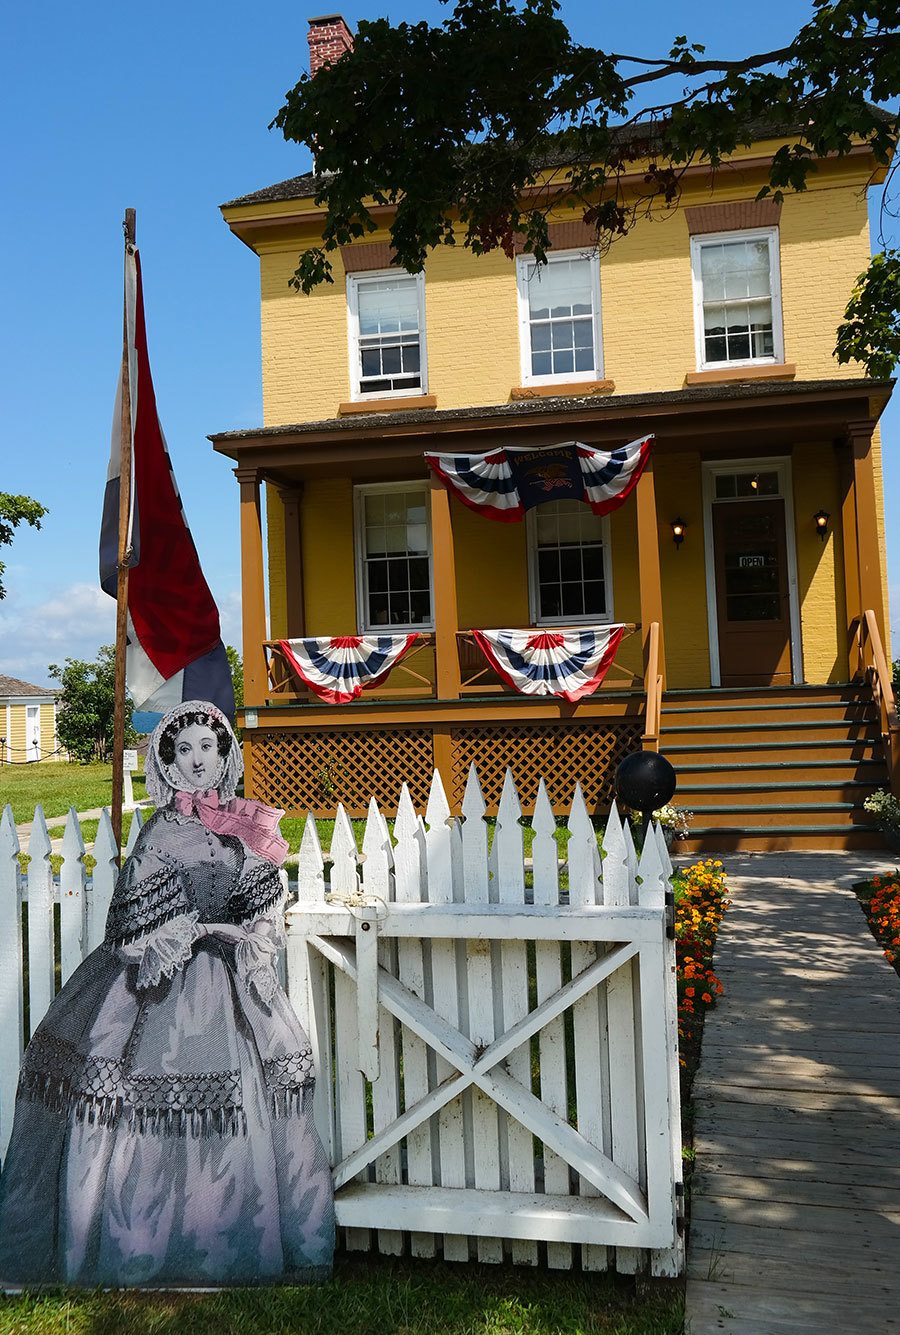 Today the Sackets Harbor Battlefield is interpreted to the public by exhibits, outdoor signs, guided and self-guided tours, and a restored 1850's Navy Yard and Commandant's House. During the summer months, guides dressed in military clothing of 1813 reenact the camp life of the common soldier.